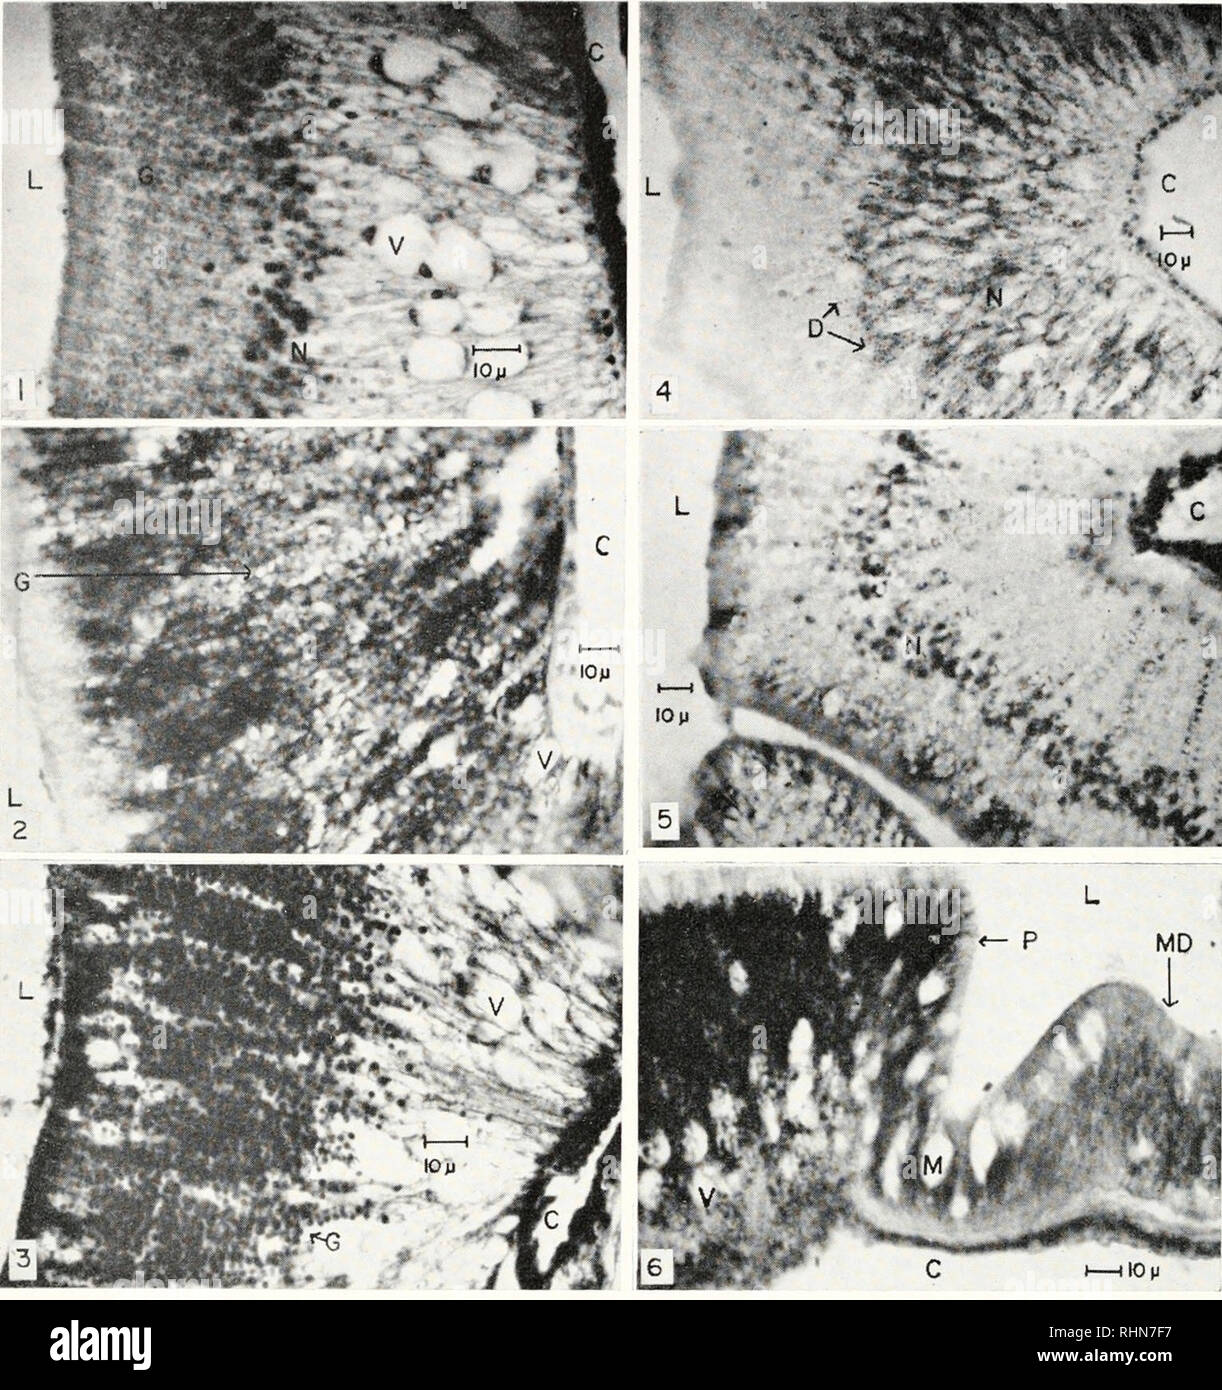 . The Biological bulletin. Biology; Zoology; Biology; Marine Biology. 470 SISTER M. AQUINAS NIMITZ. FIGURE 1. Pouch epithelium of the pyloric caeca of Pisastcr. The nuclei forming a band to the left of the center of the photograph (N) belong to the storage cells, and the granules (G) reaching in files from the nuclear band toward the luminal border (L) are the storage cell granules. The large vacuoles (V) and the nuclei associated with them belong to zymogen cells. The coelom (C) is at the right. This tissue was fixed in Rossman's fluid, embedded in paraffin, sectioned at 7 M and stained with  Stock Photo